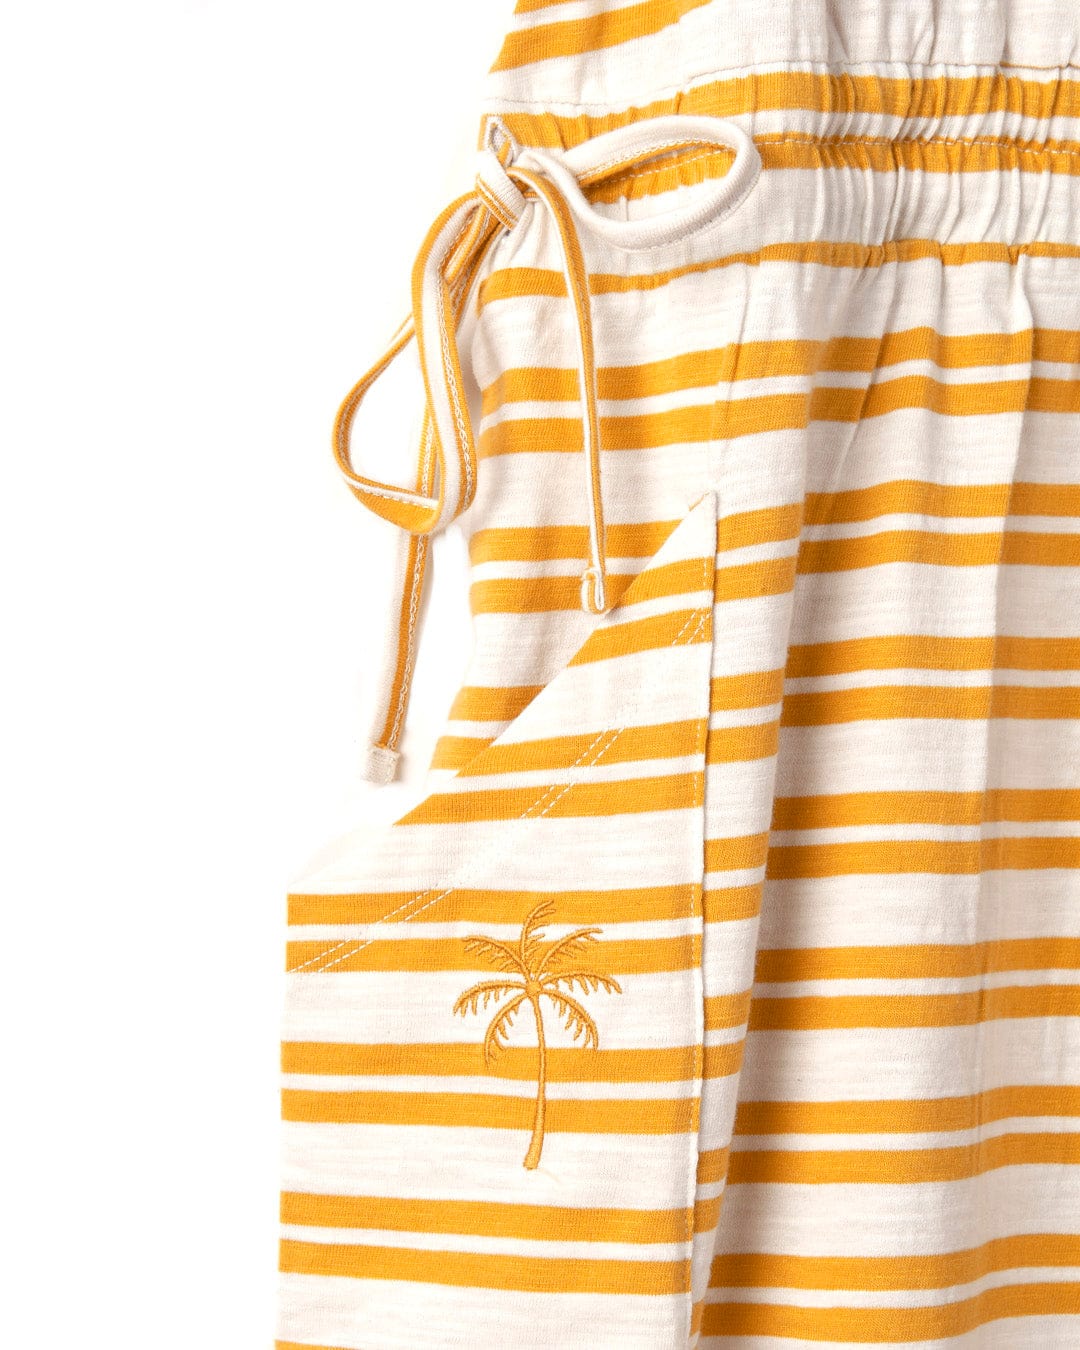 Striped shorts with a palm tree design and an elasticated waist closure.
Product Name: Saltrock - Womens Skylar Bauhaus Shorts - Yellow